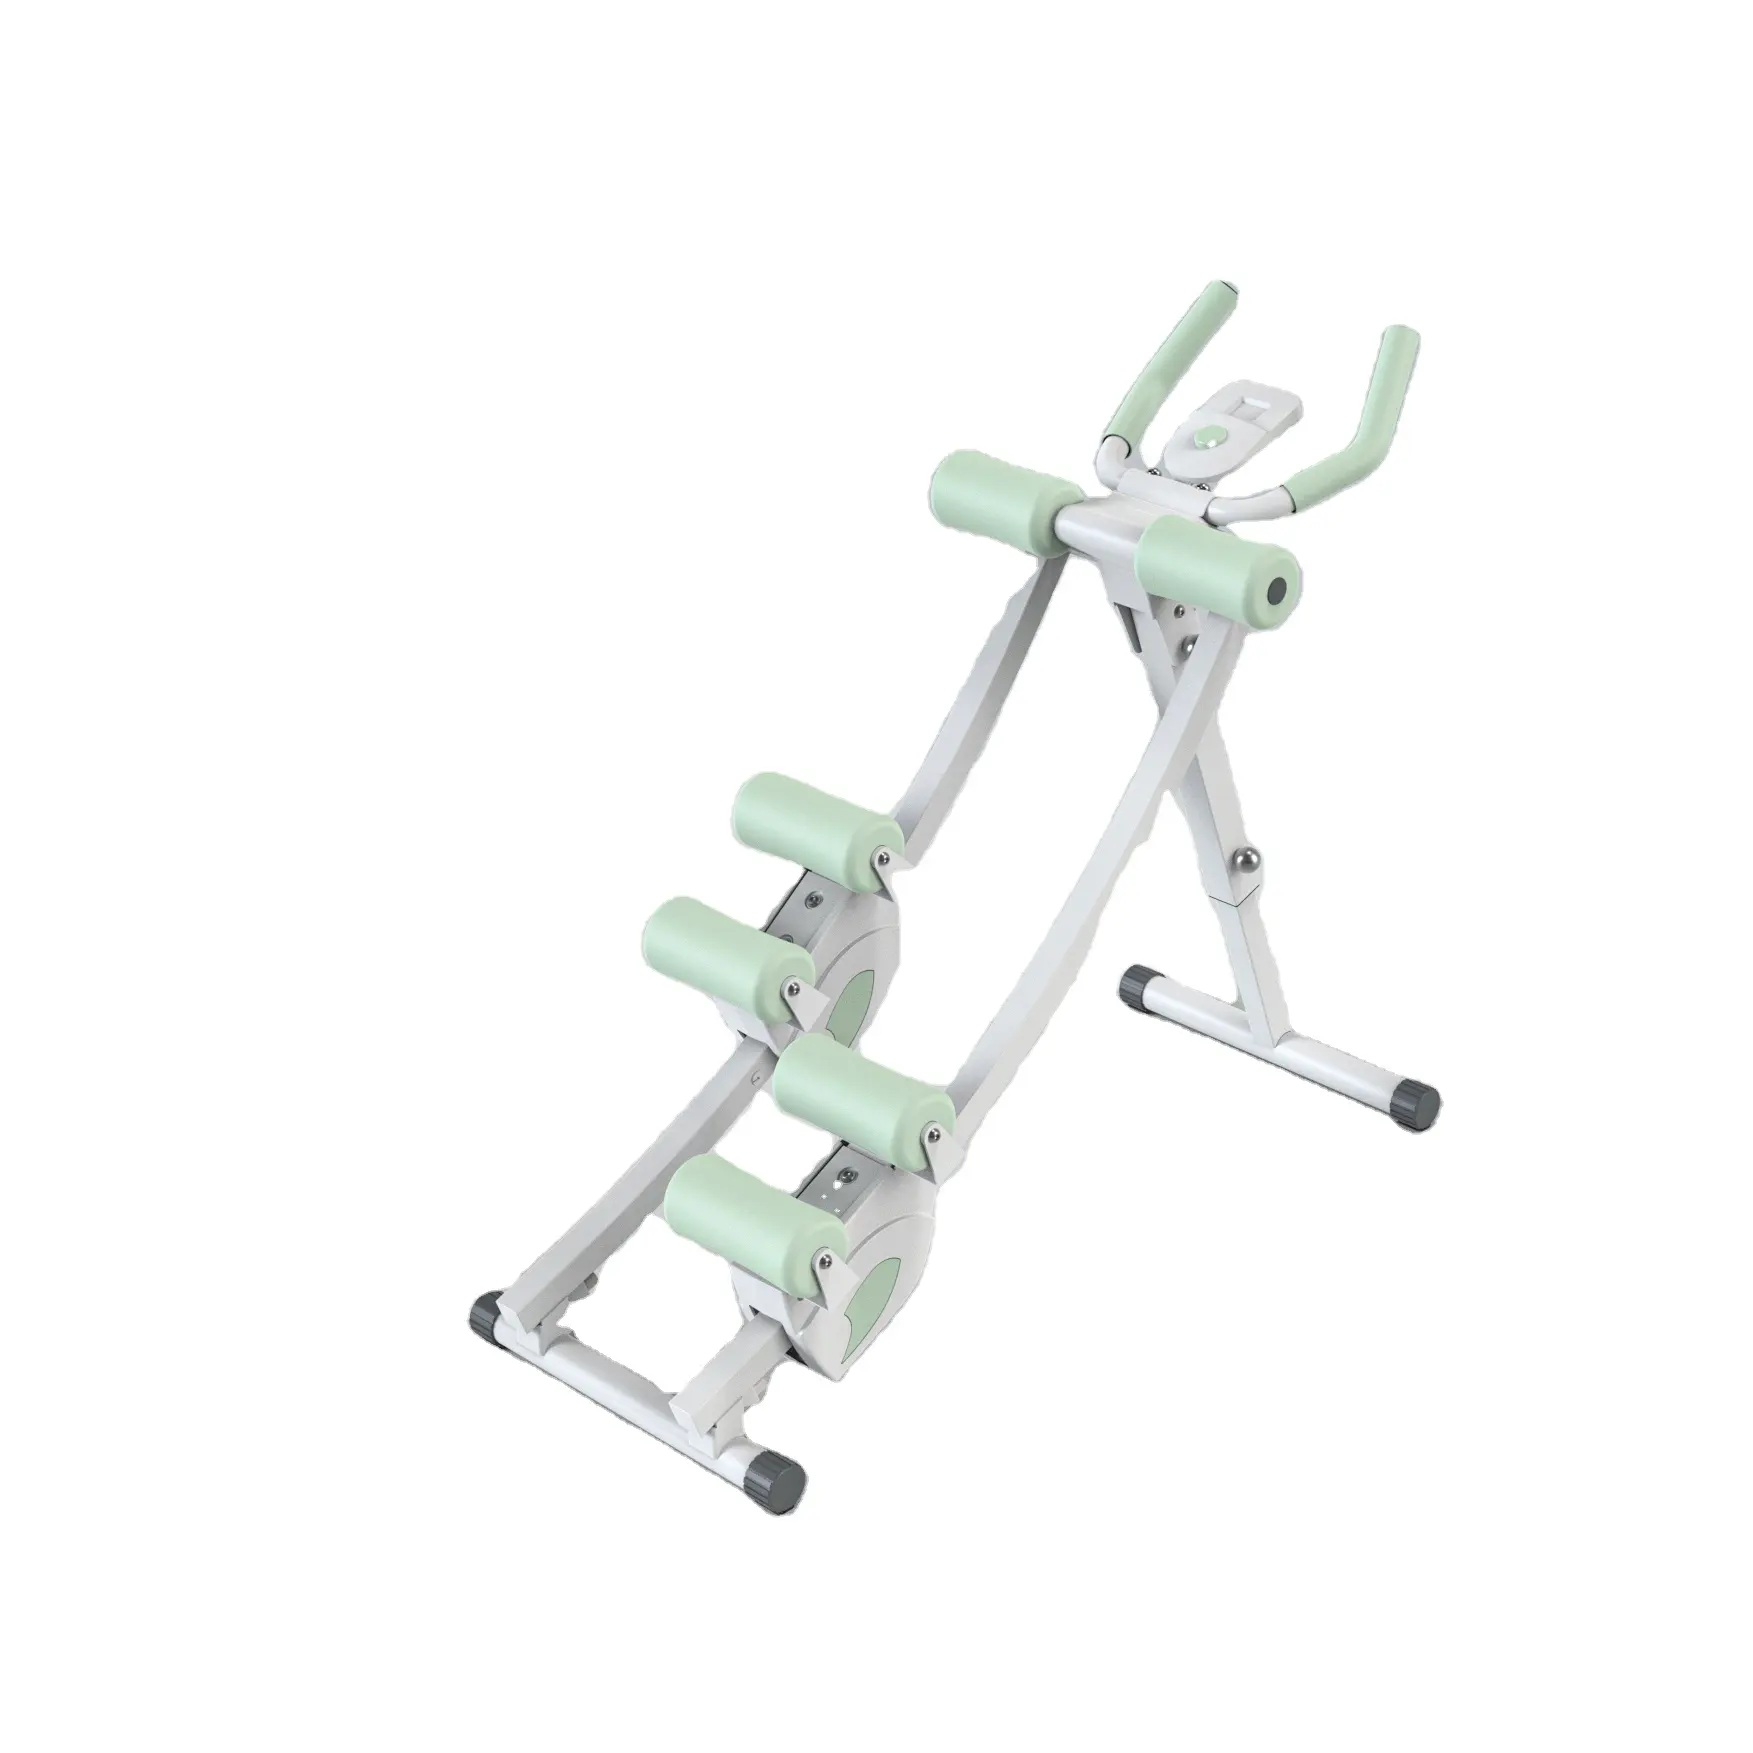 DDS 6657 hot sale home gym equipment fitness and body building abd crunch machine with abd generator for abdominal exercise